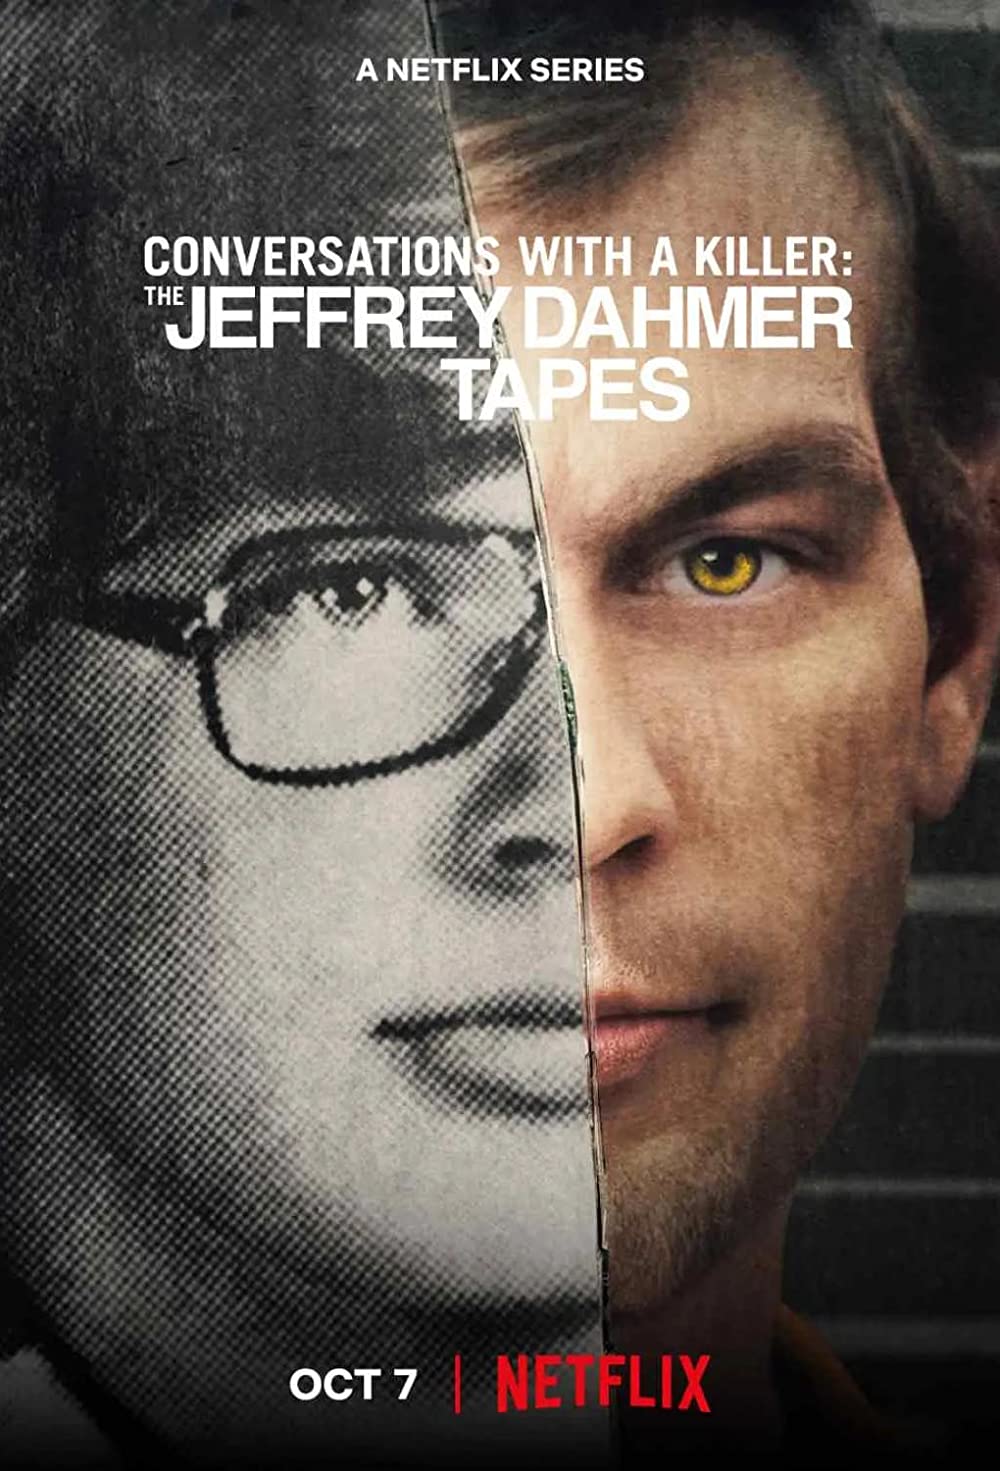 Conversations with a Killer: The Jeffrey Dahmer Tapes - Season 1 Episode 1